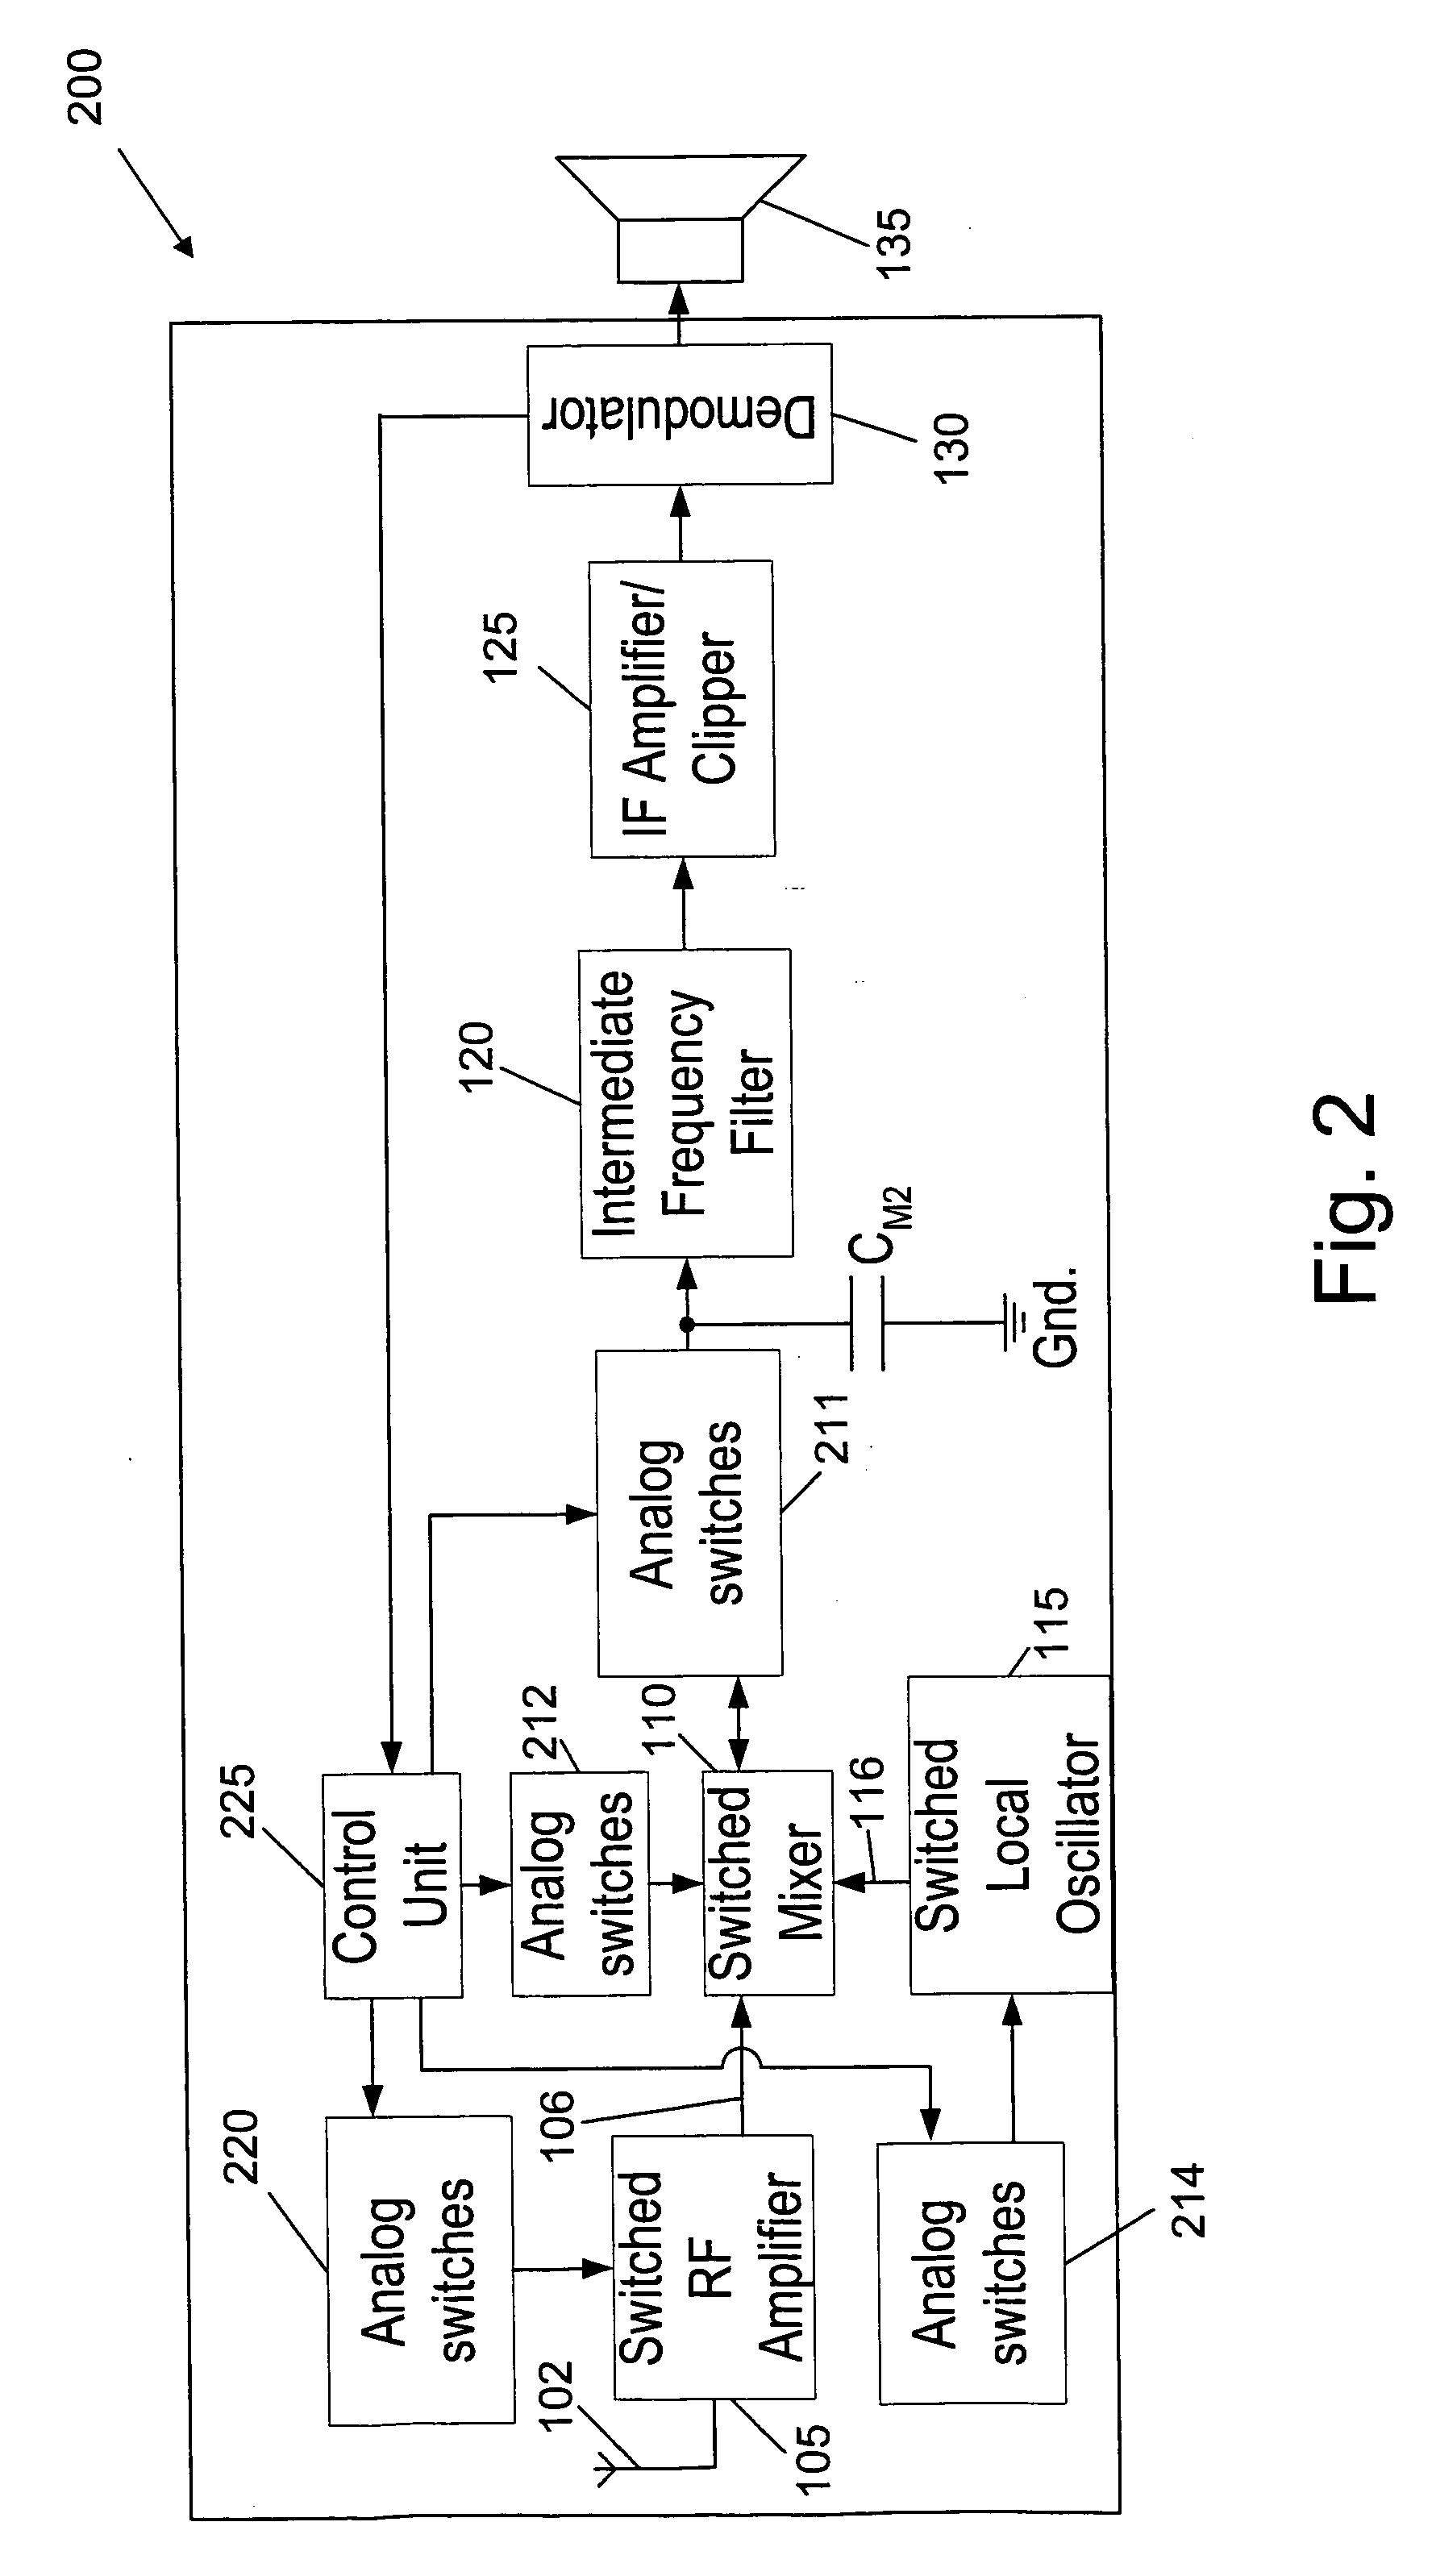 Low power radio frequency receiver